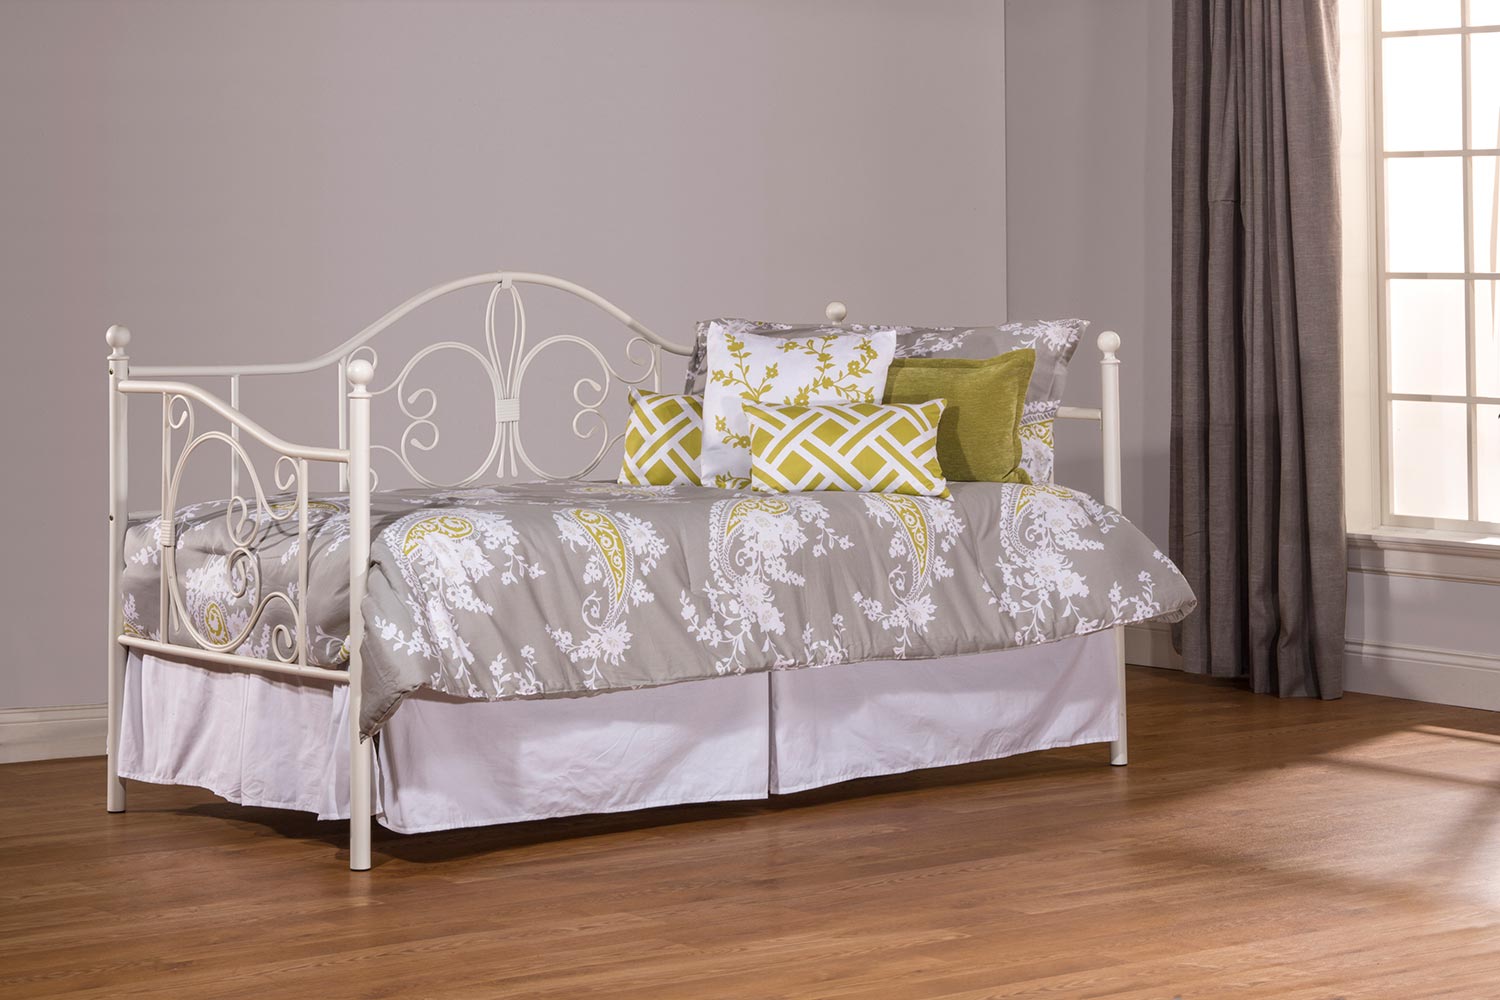 Hillsdale Ruby Daybed with Suspension Deck and Roll Out Trundle Unit - Textured White